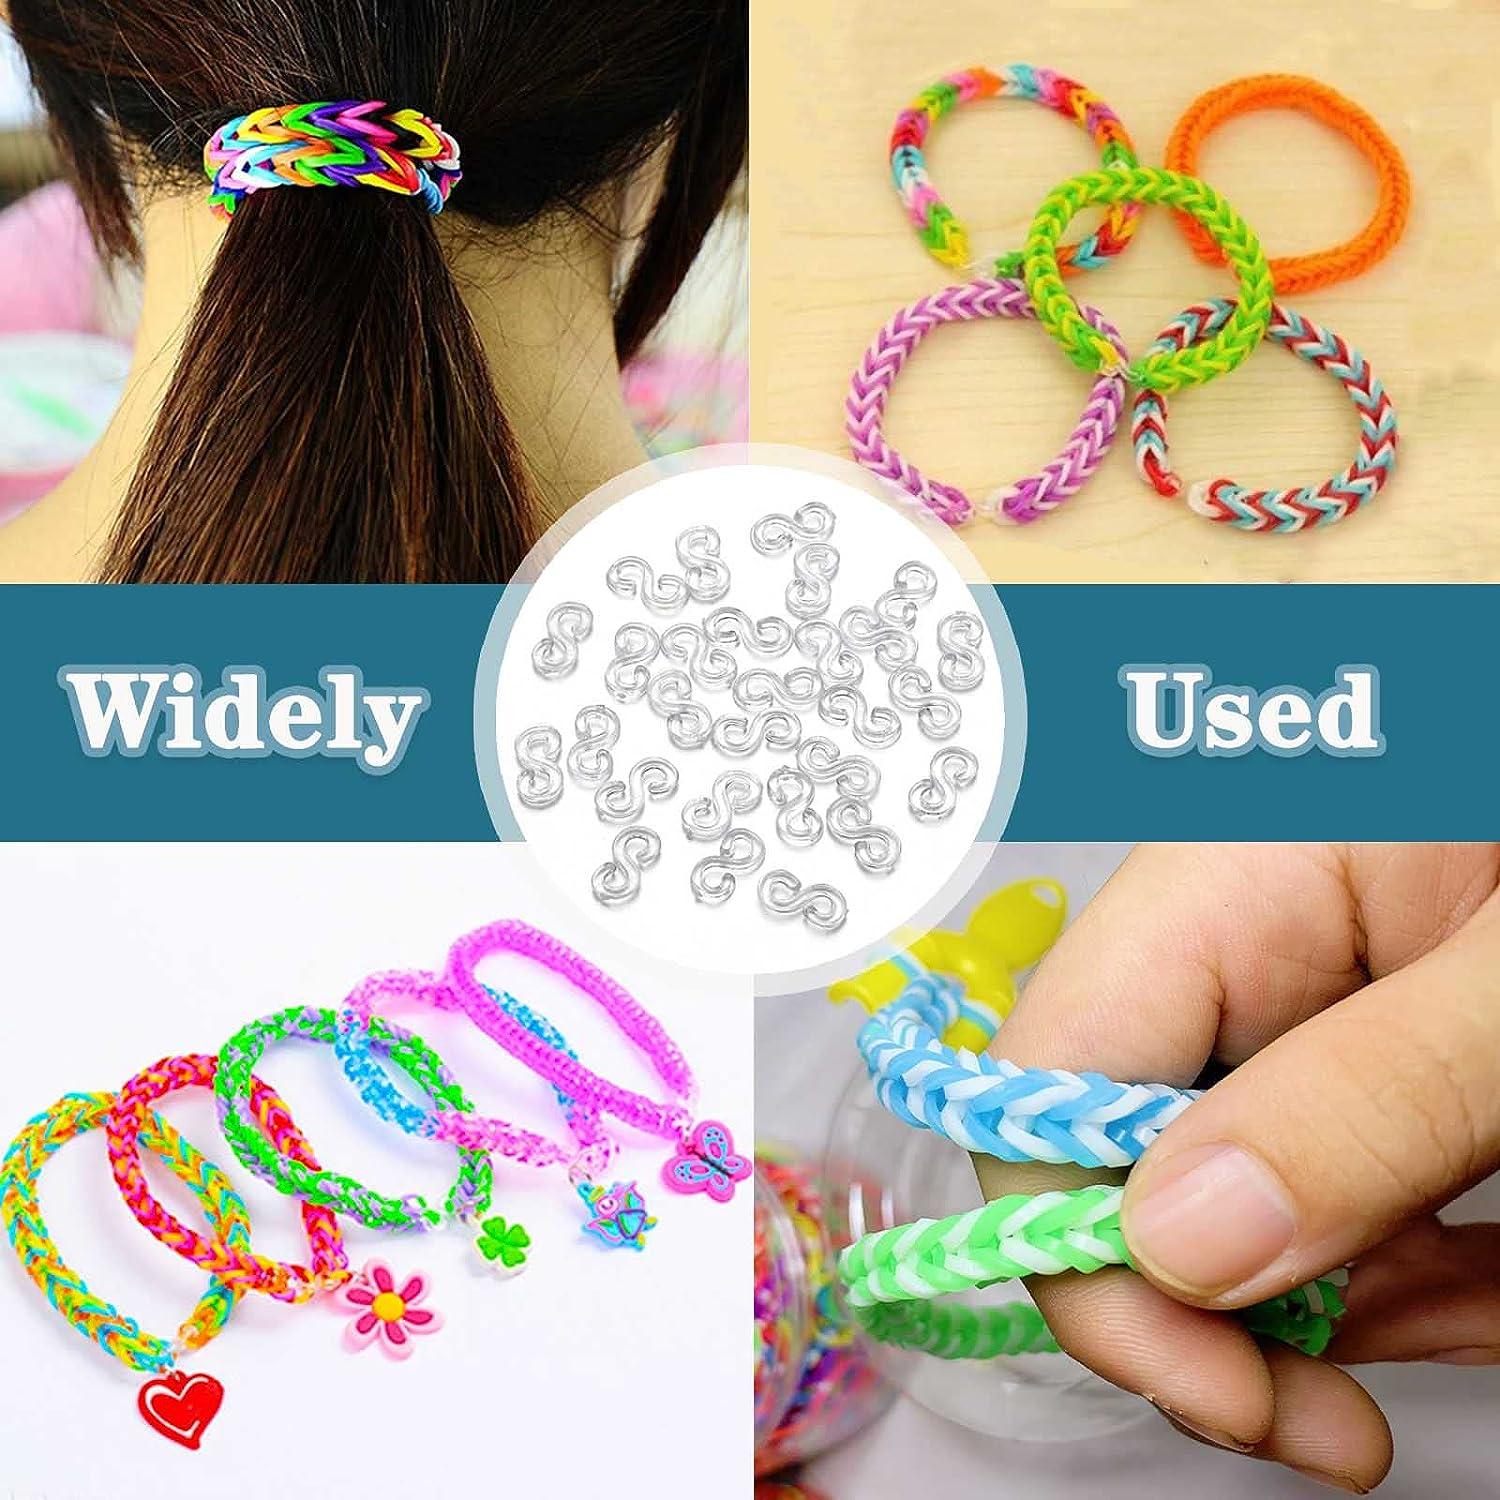 S Clips Rubber Band Clips 1000 Pieces Loom Rubber Band Clips Plastic Band  Clips Connectors Refills Bracelet Kit Clip for Loom Bracelets DIY Making  Refill Kit Clear